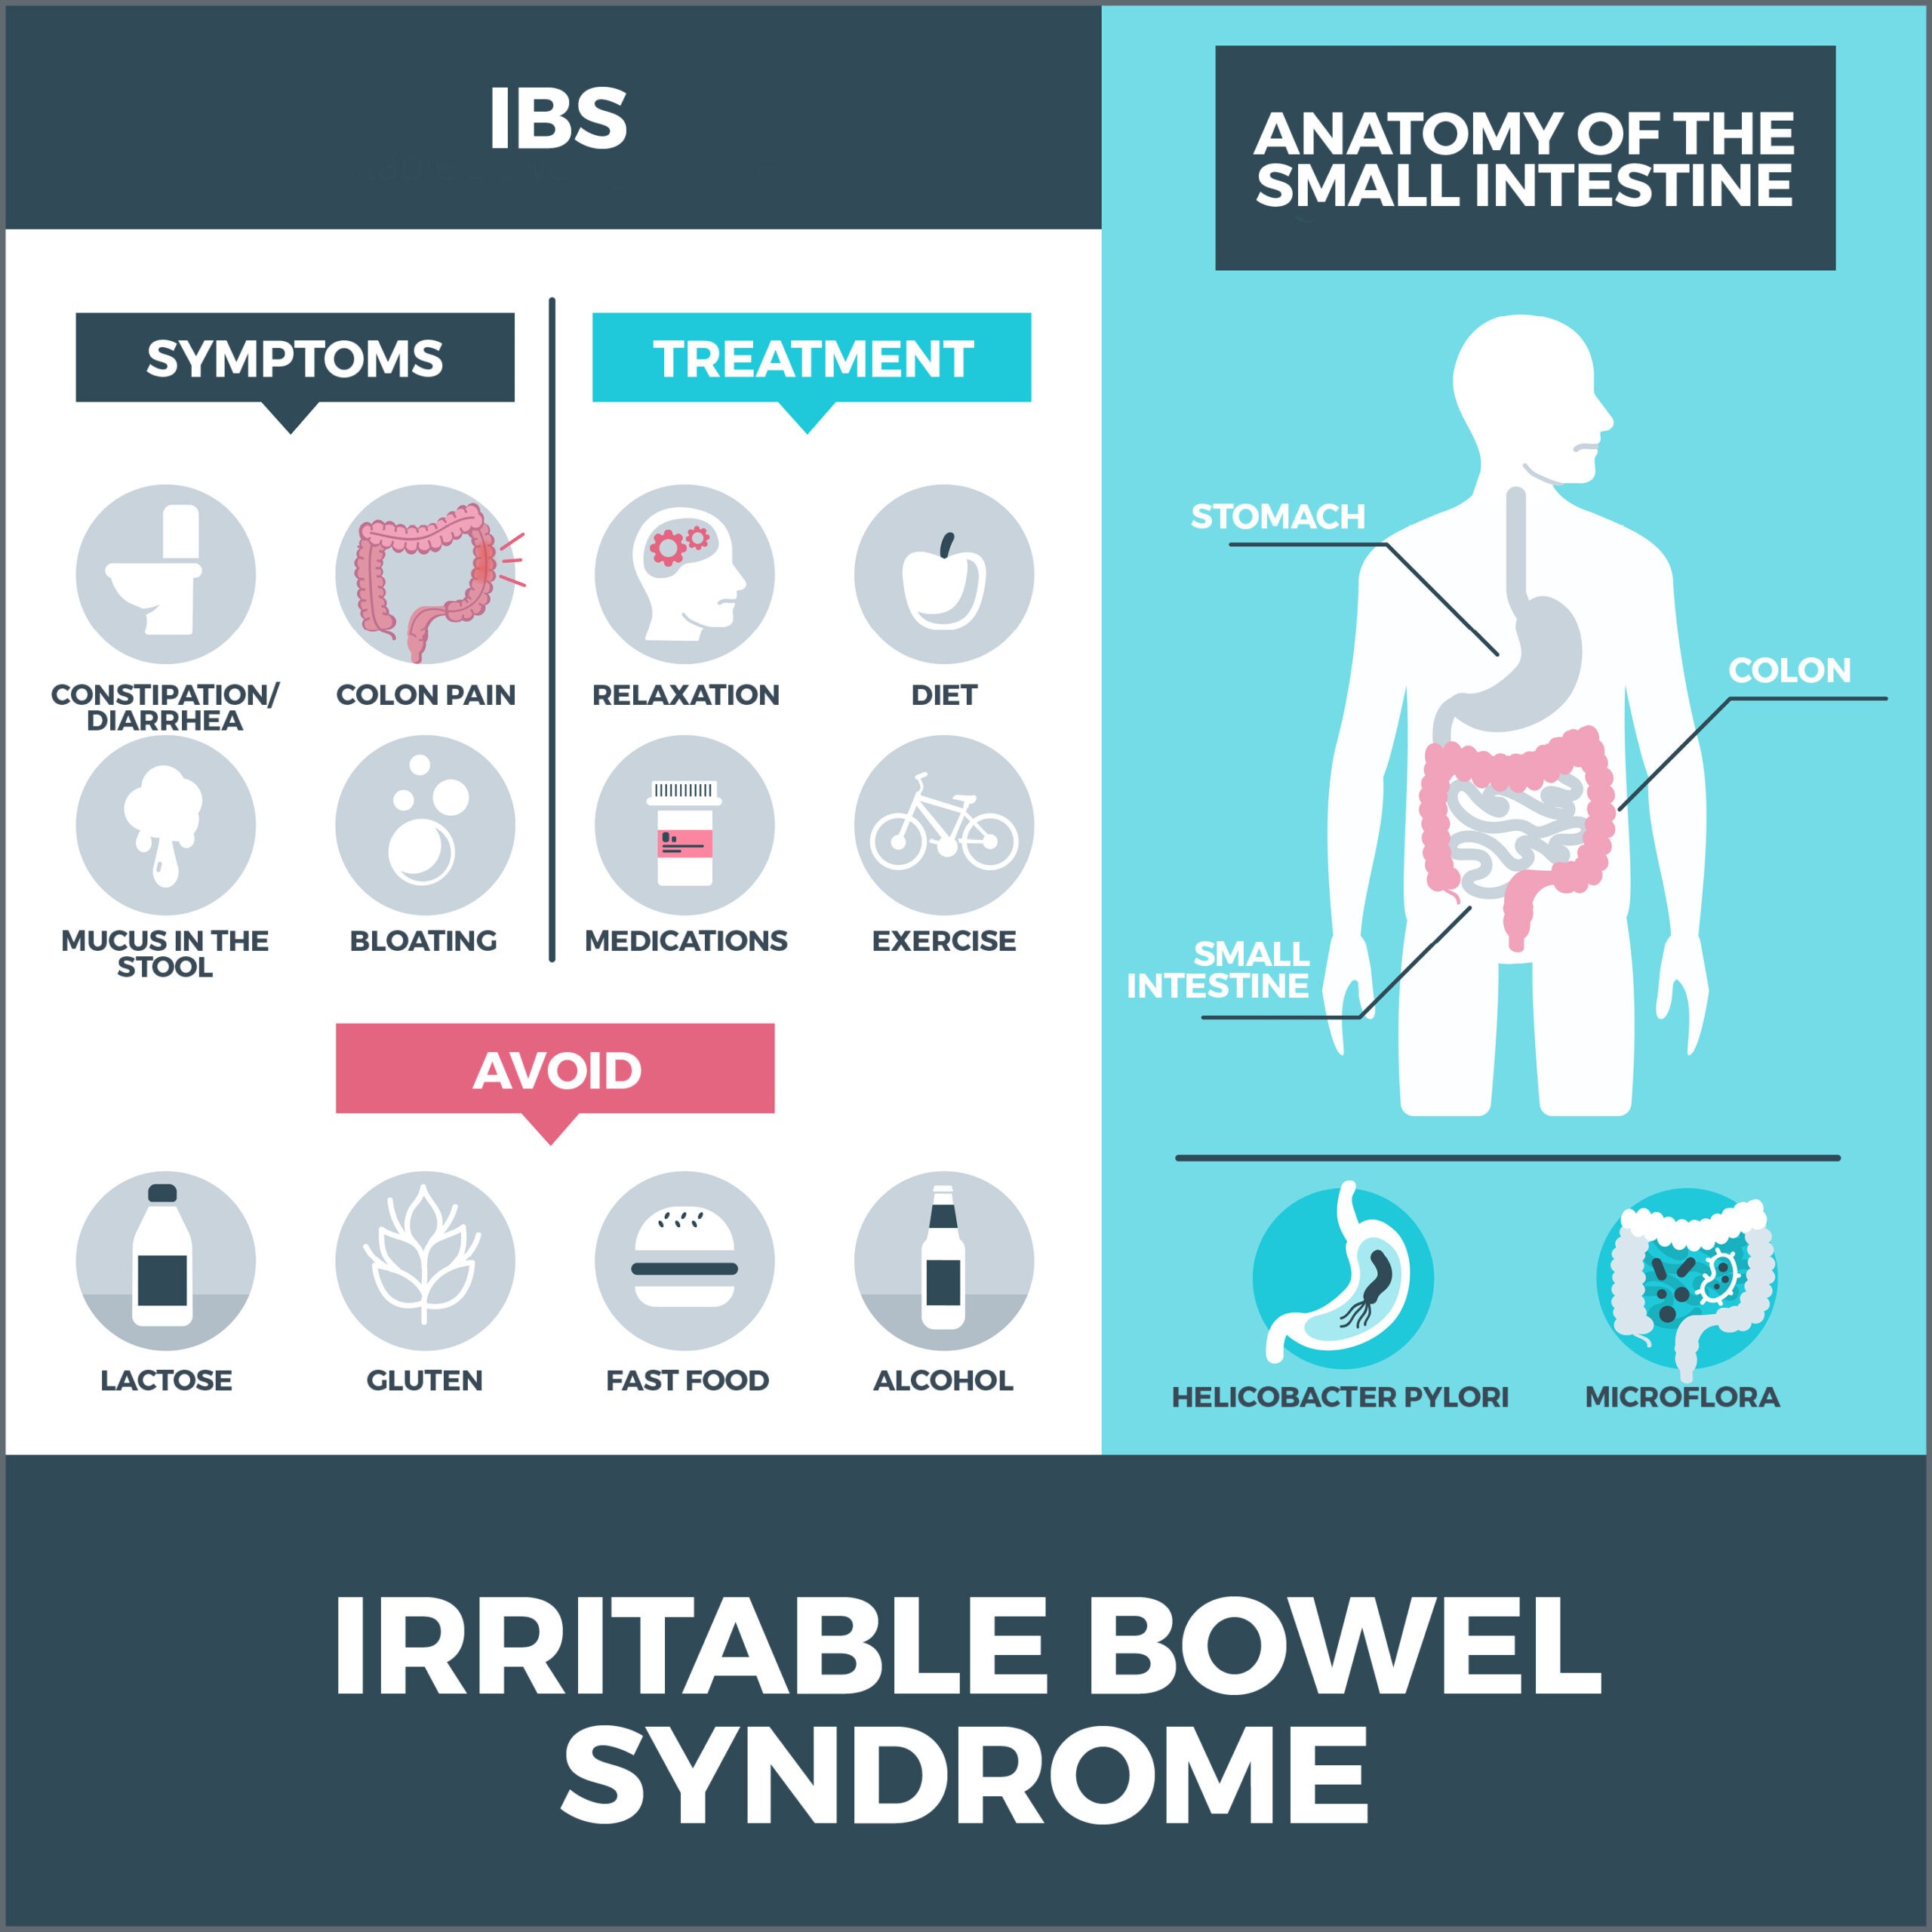 irritable bowel syndrome causes